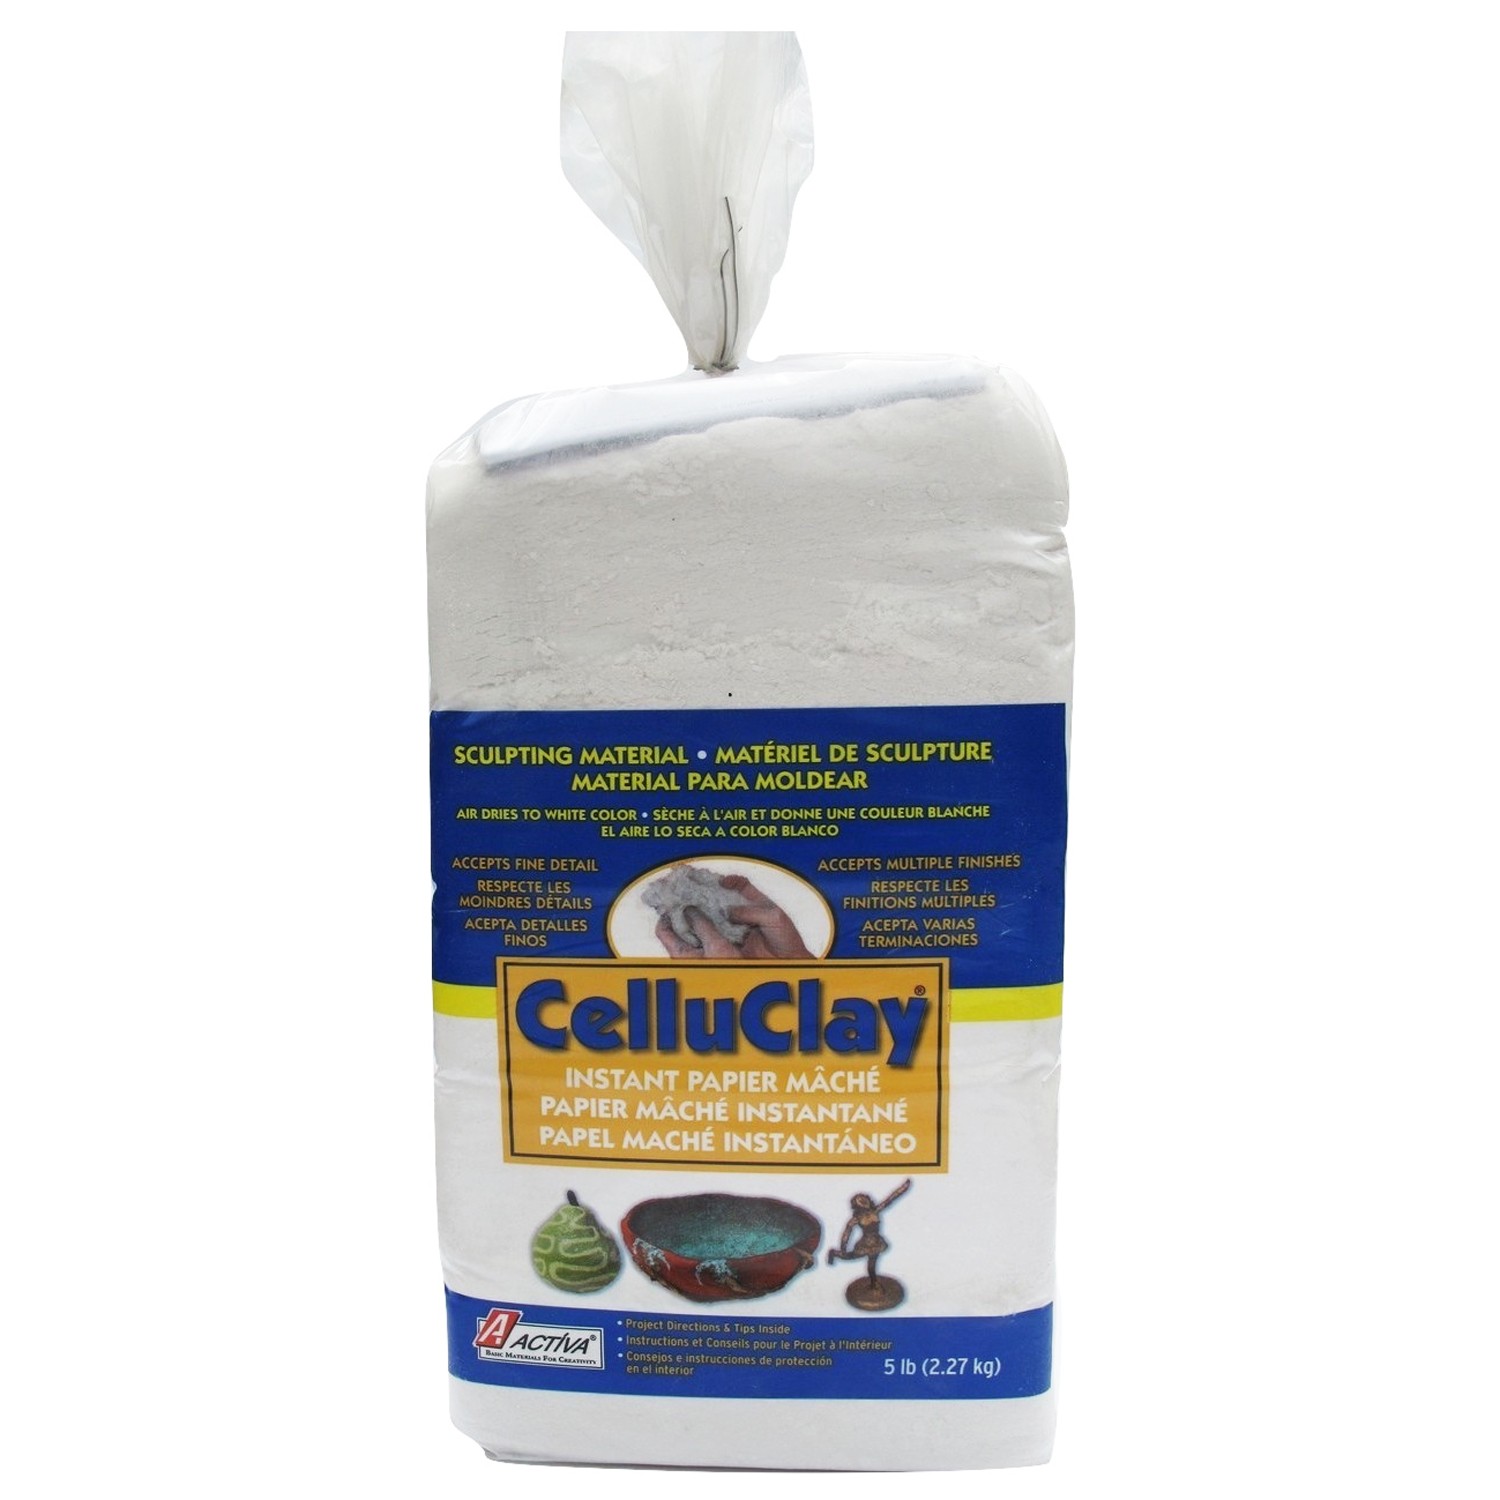 Celluclay Bright White, 5 lbs